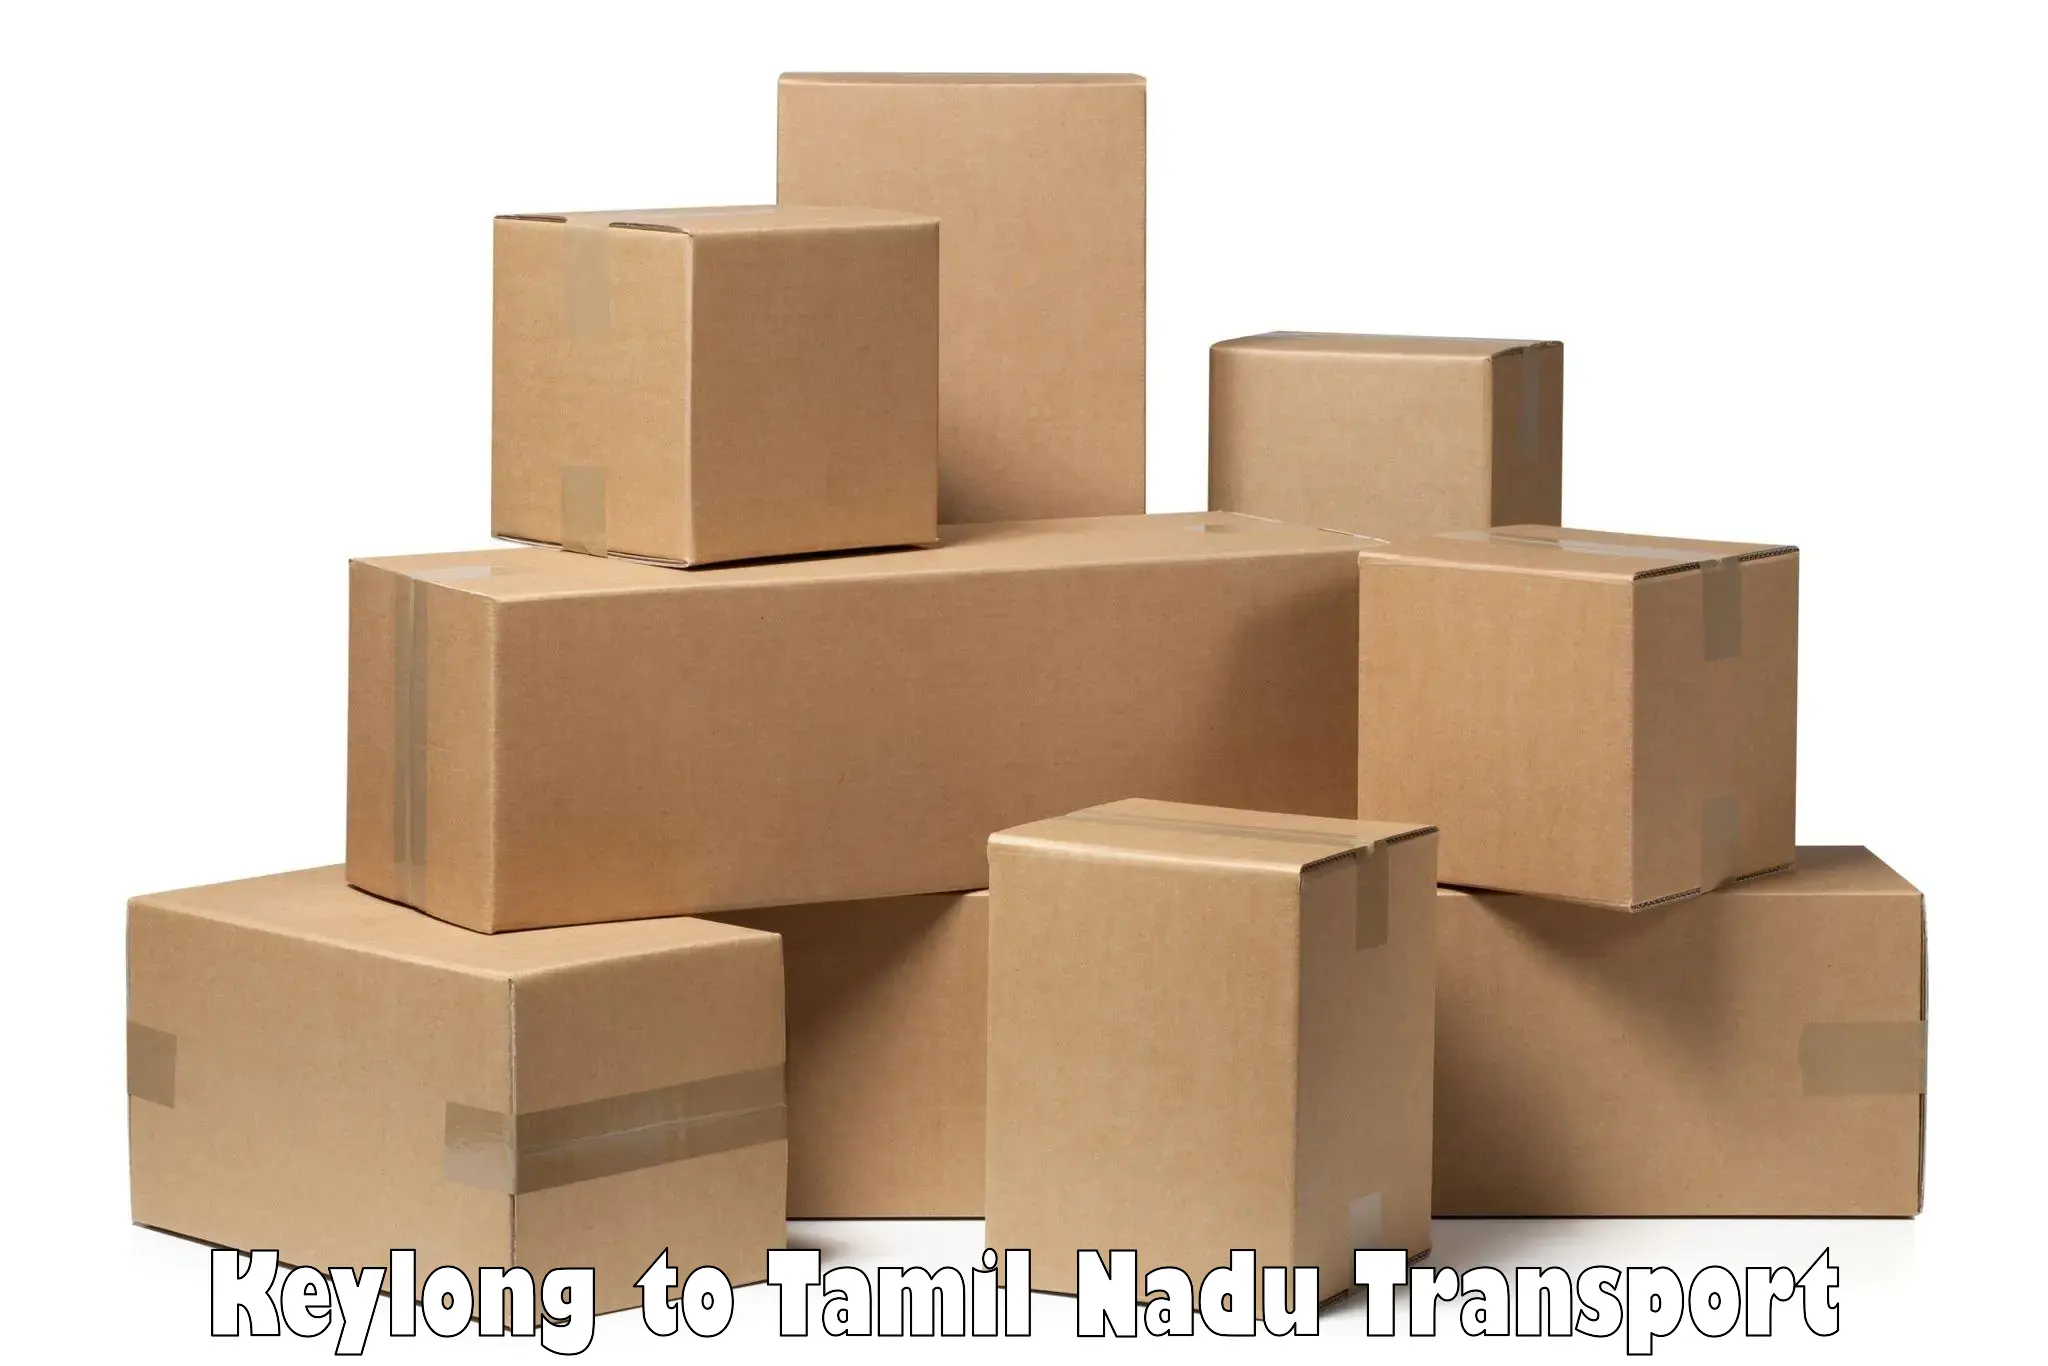 Container transport service Keylong to Tuticorin